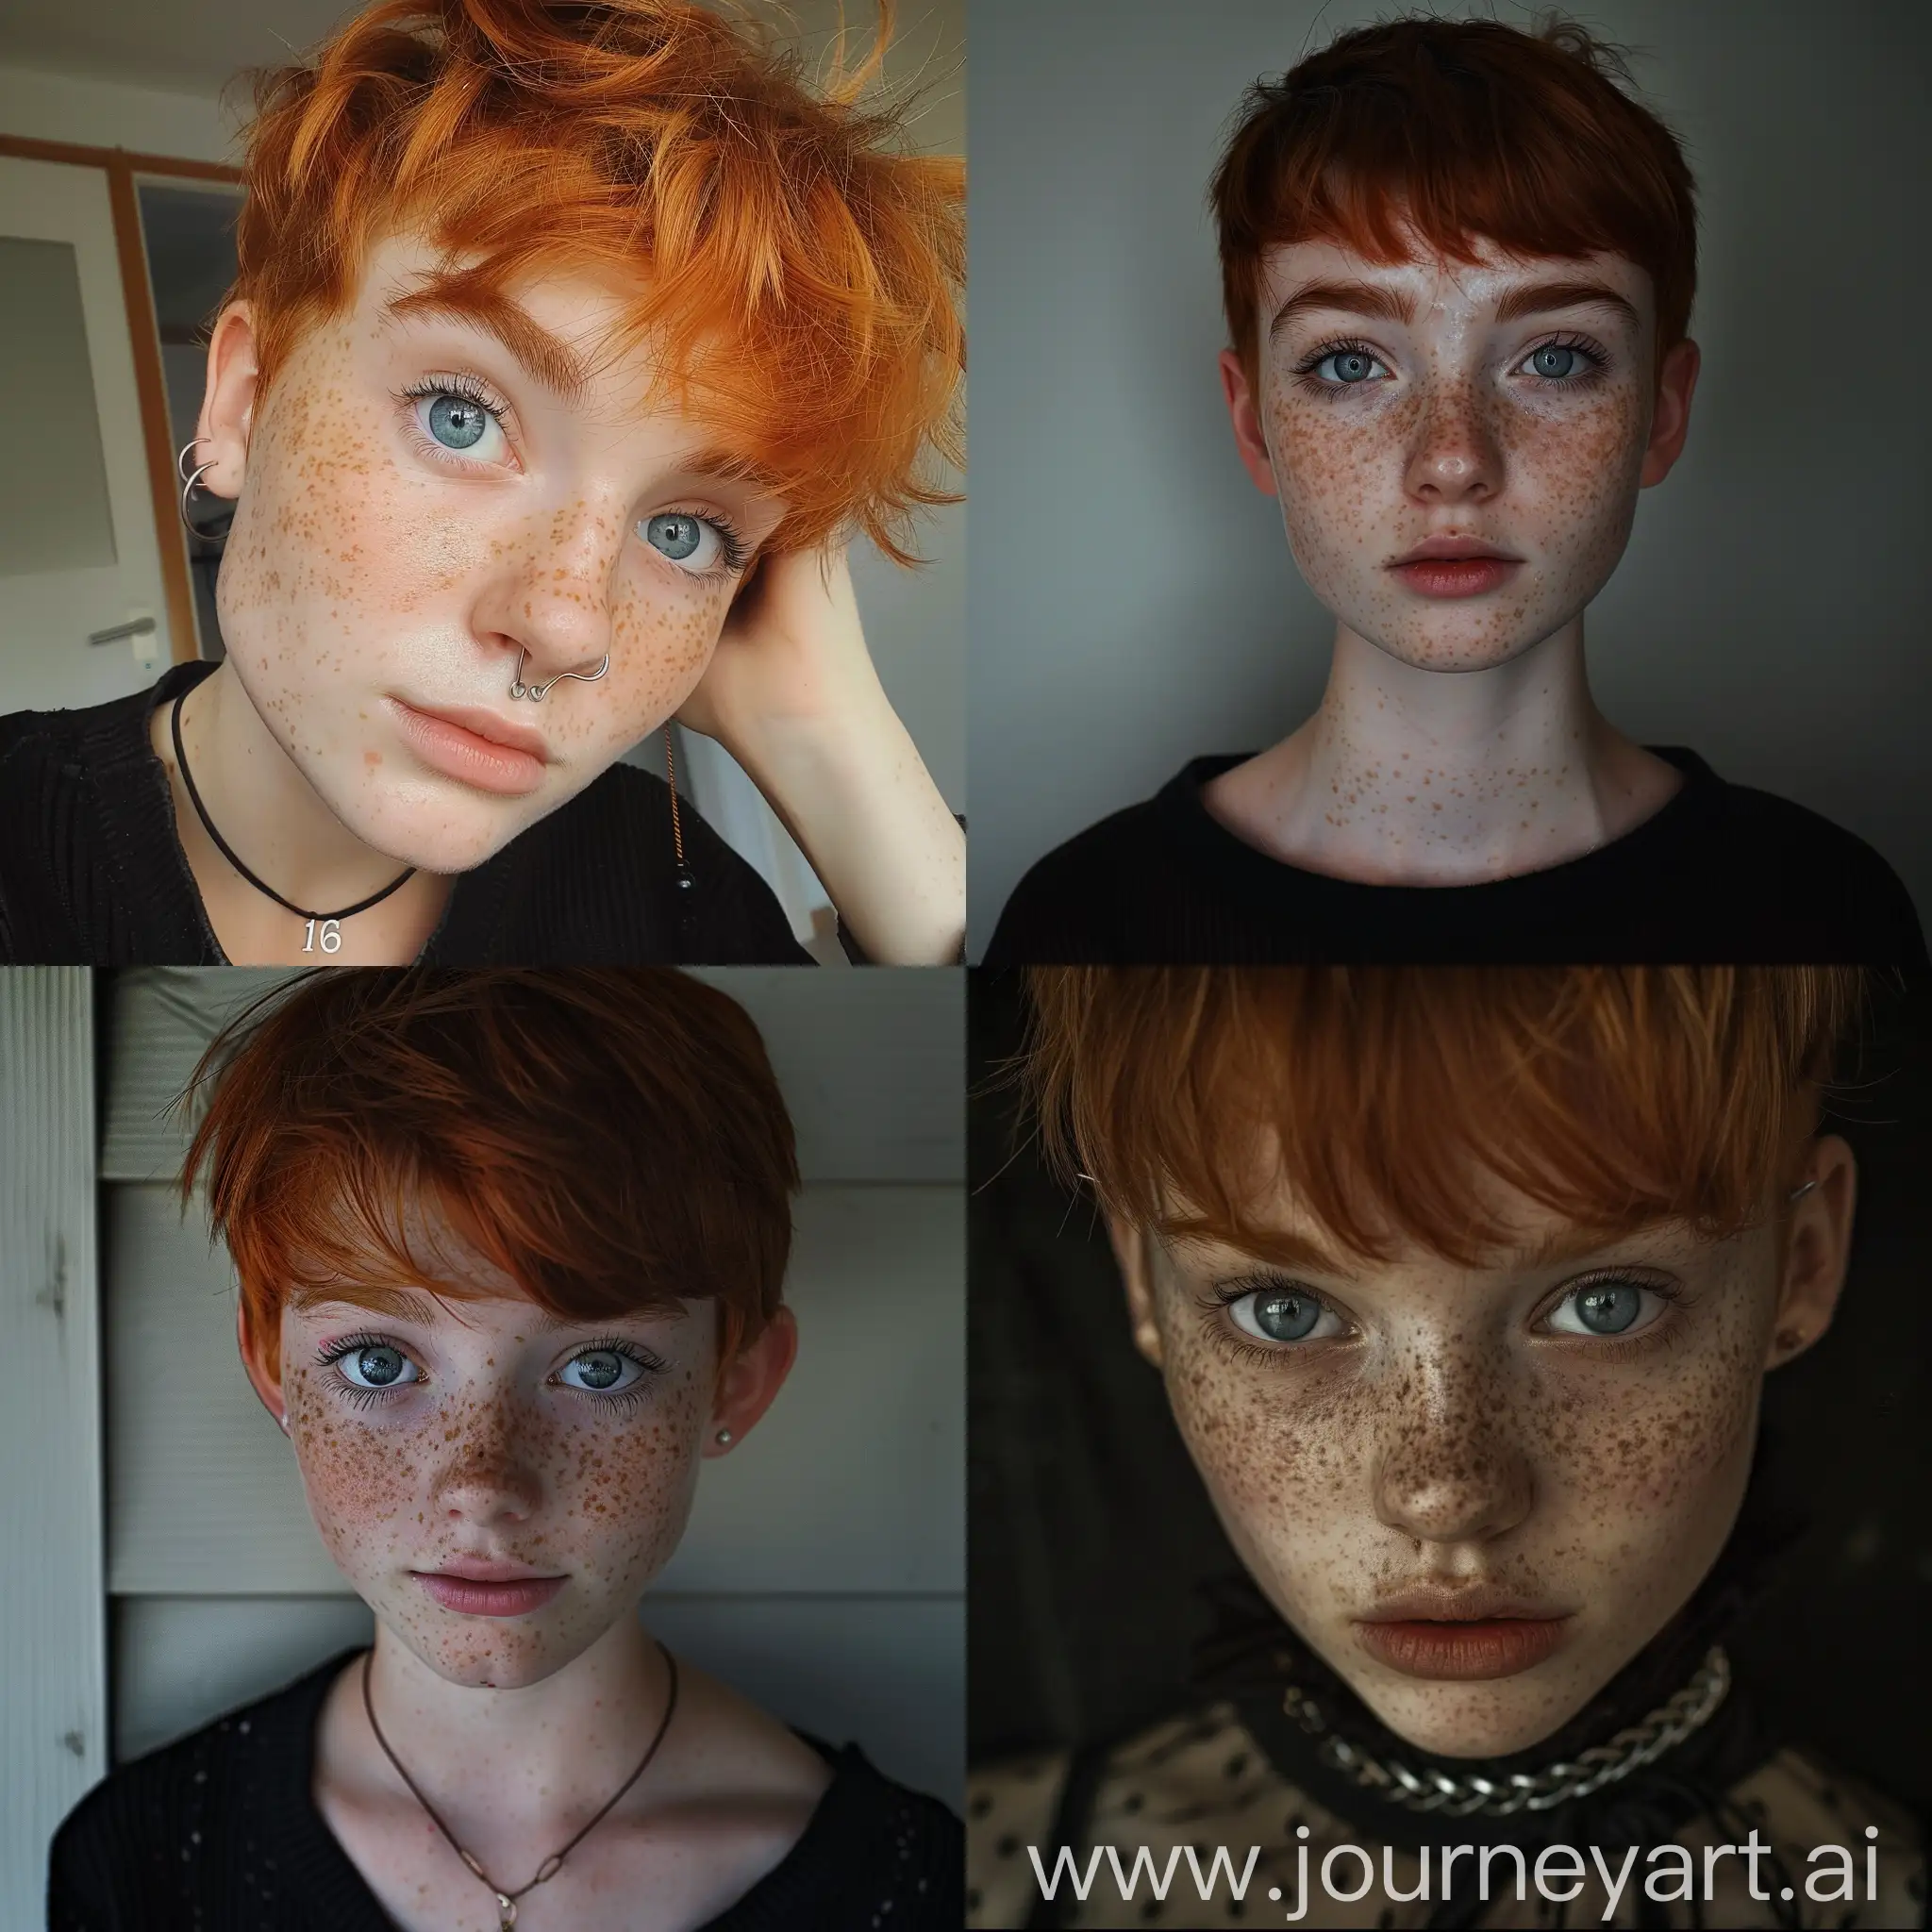 Gothic-Teen-with-Red-Pixie-Cut-and-Icy-Blue-Eyes-Portrait